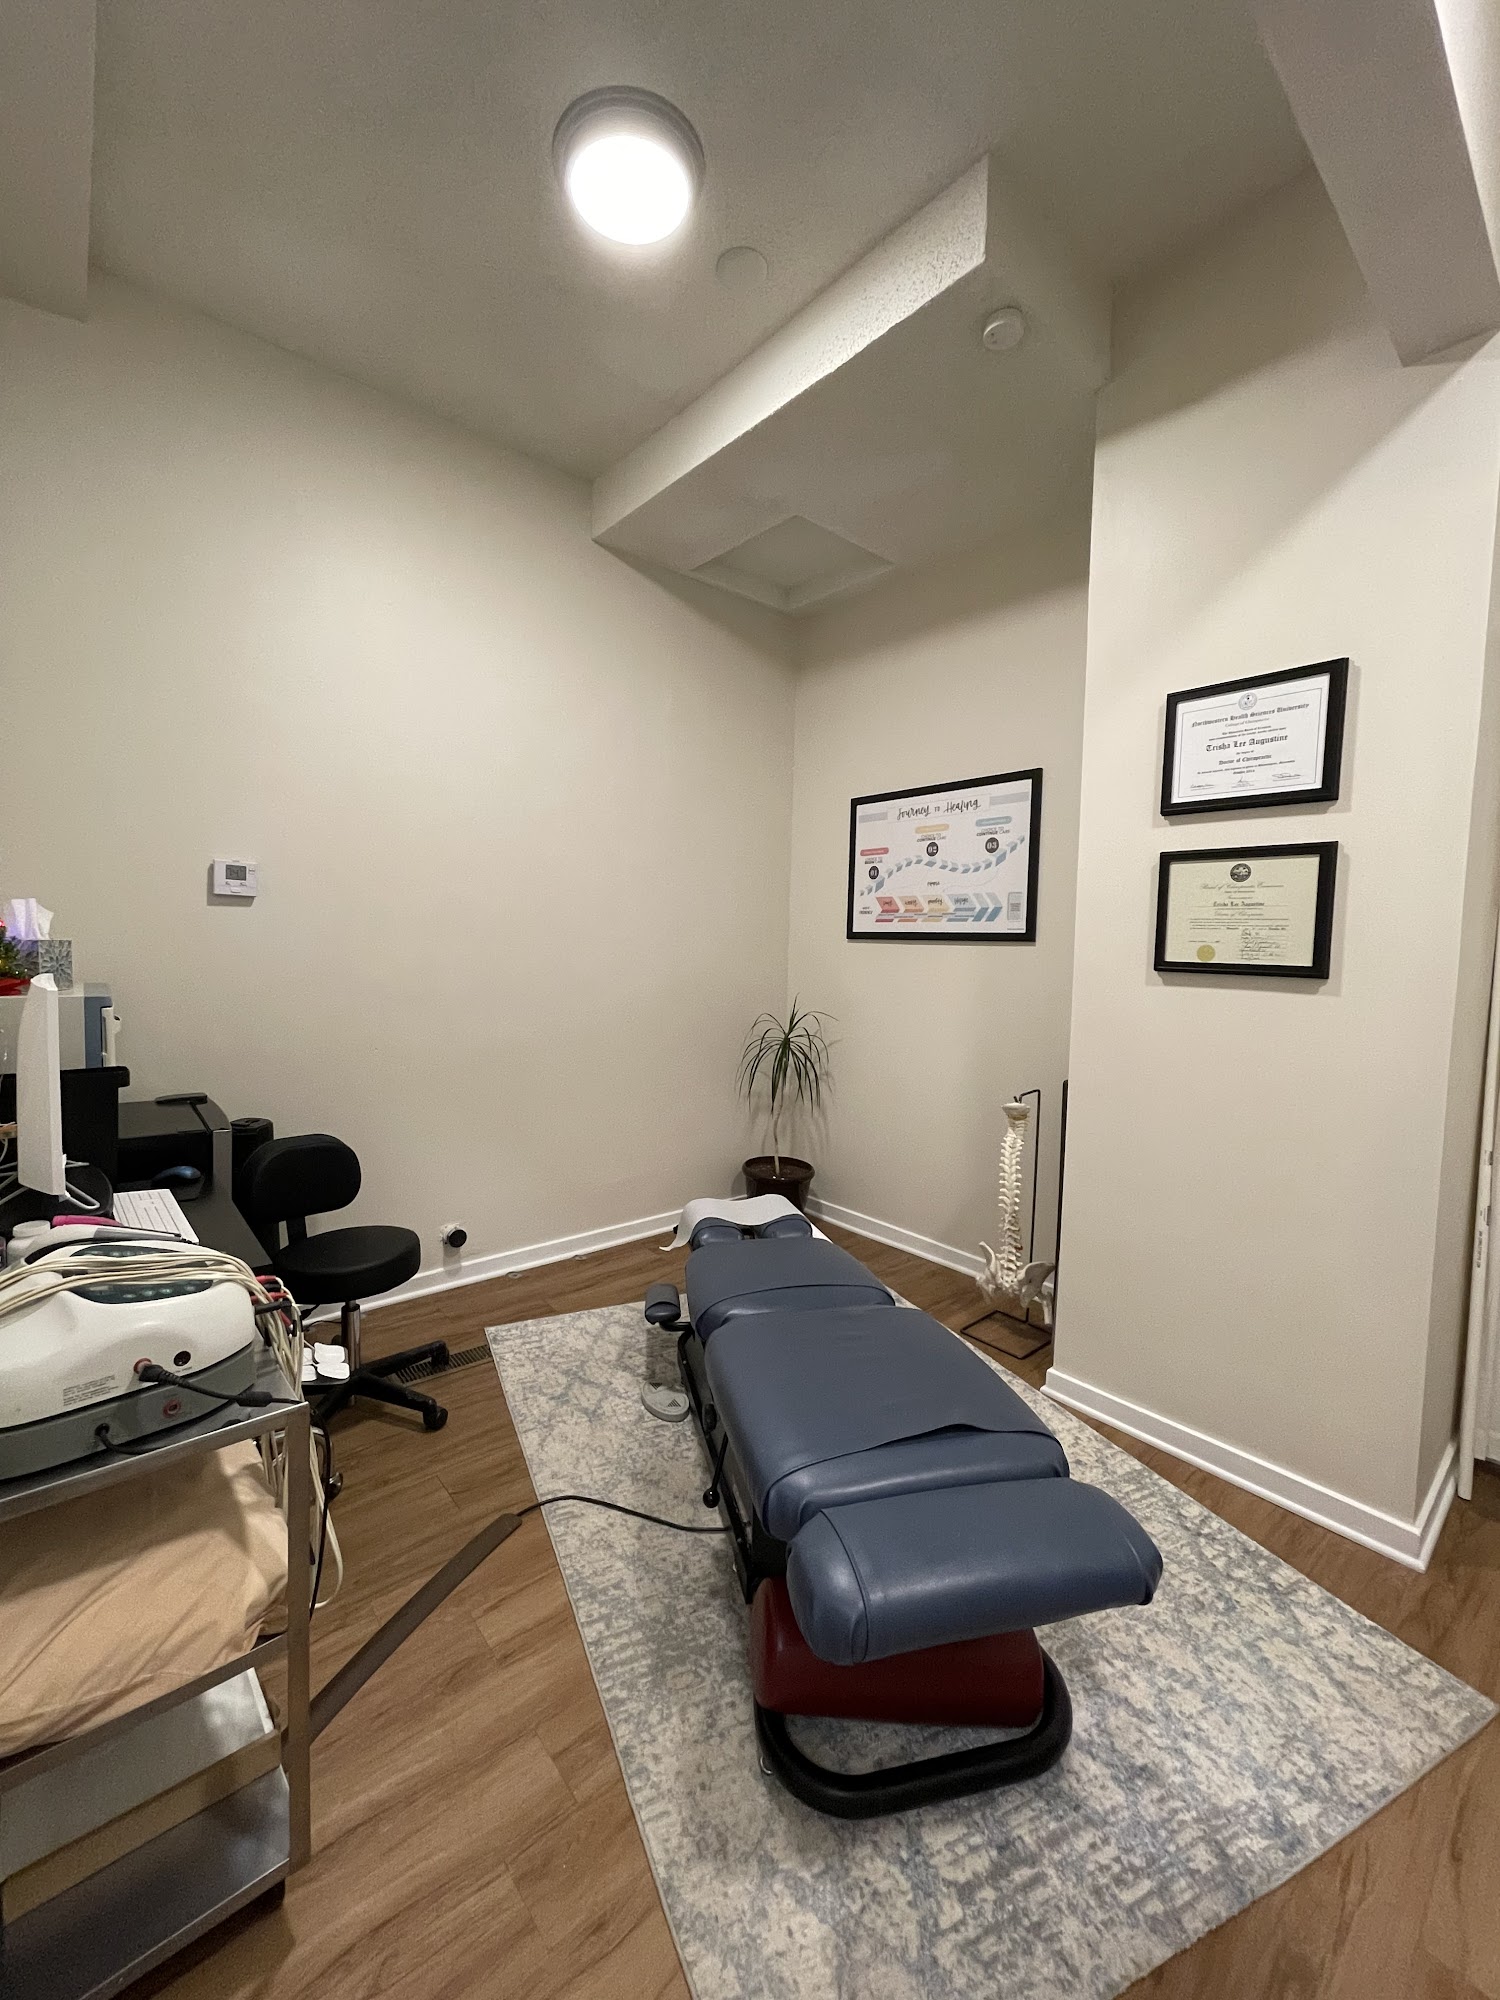 Grand Health Chiropractic and Wellness Center